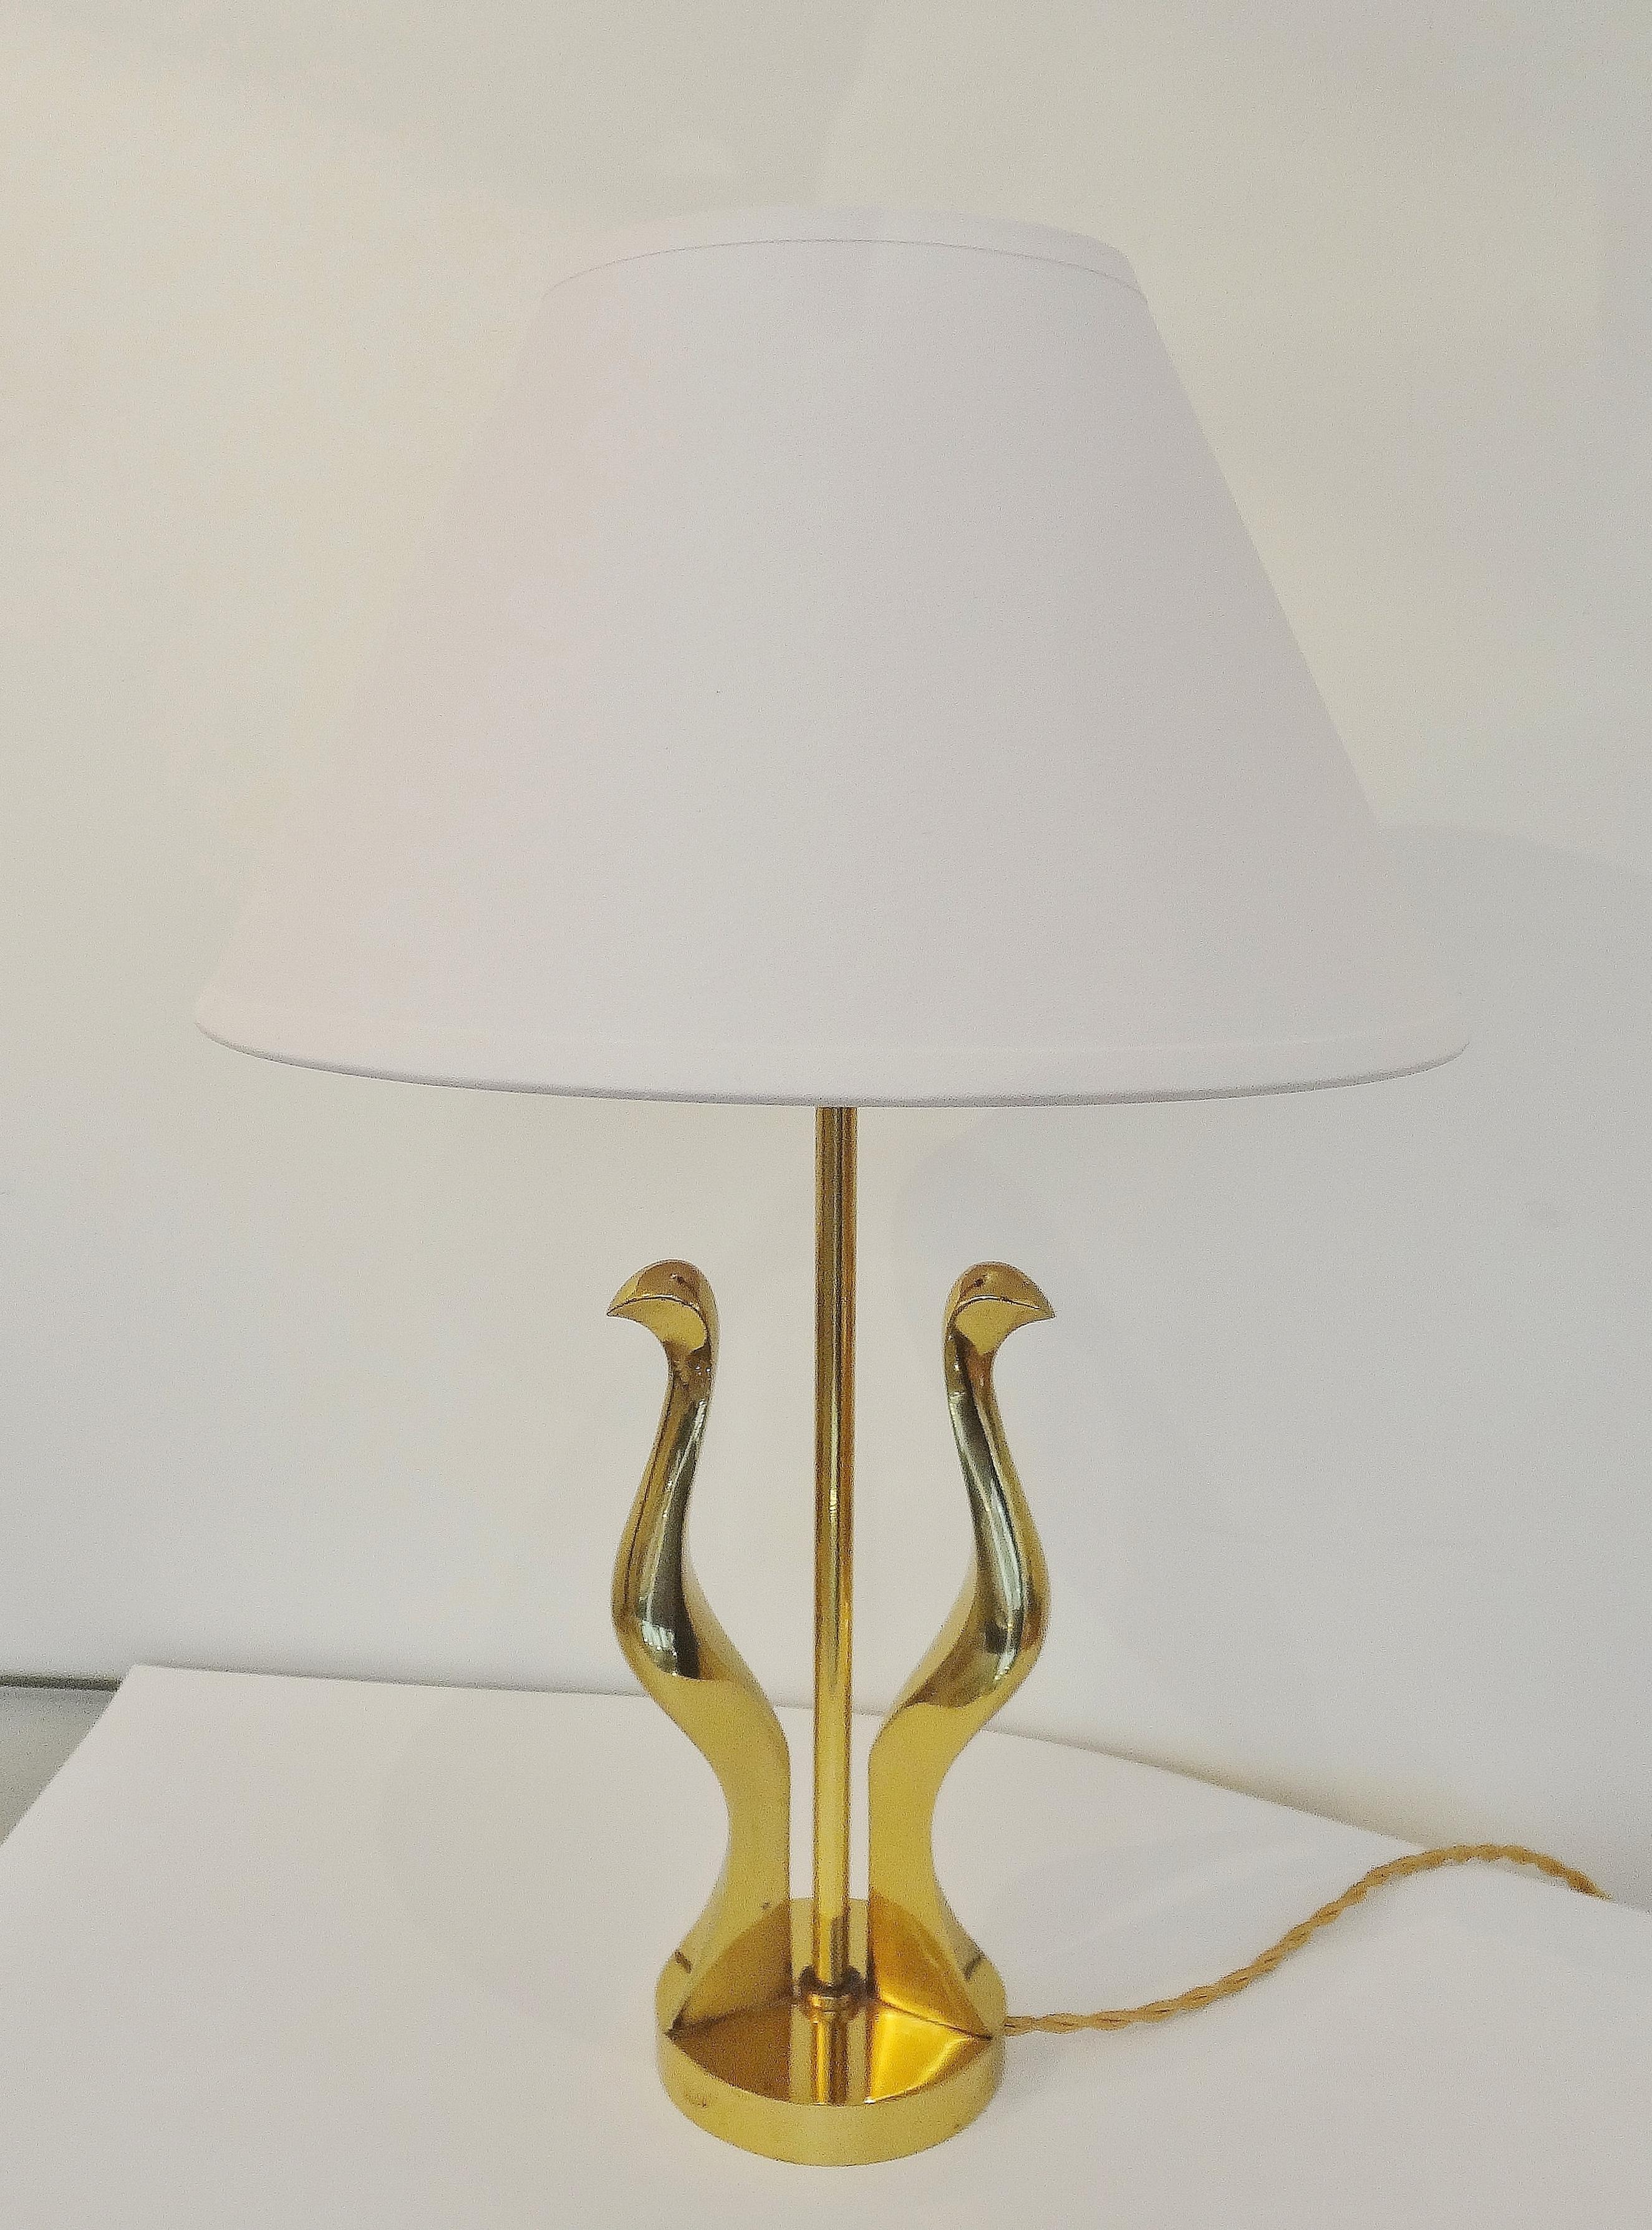 Riccardo Scarpa, Italie, 1960s.
Small refined table lamp with two stylized birds.
Gilt varnished polished bronze. One light. White shade.
Signed. Measures: Bronze 30 x L 12 cm.

Riccardo Scarpa (Venice, Italy 1905-), was a painter and sculptor.